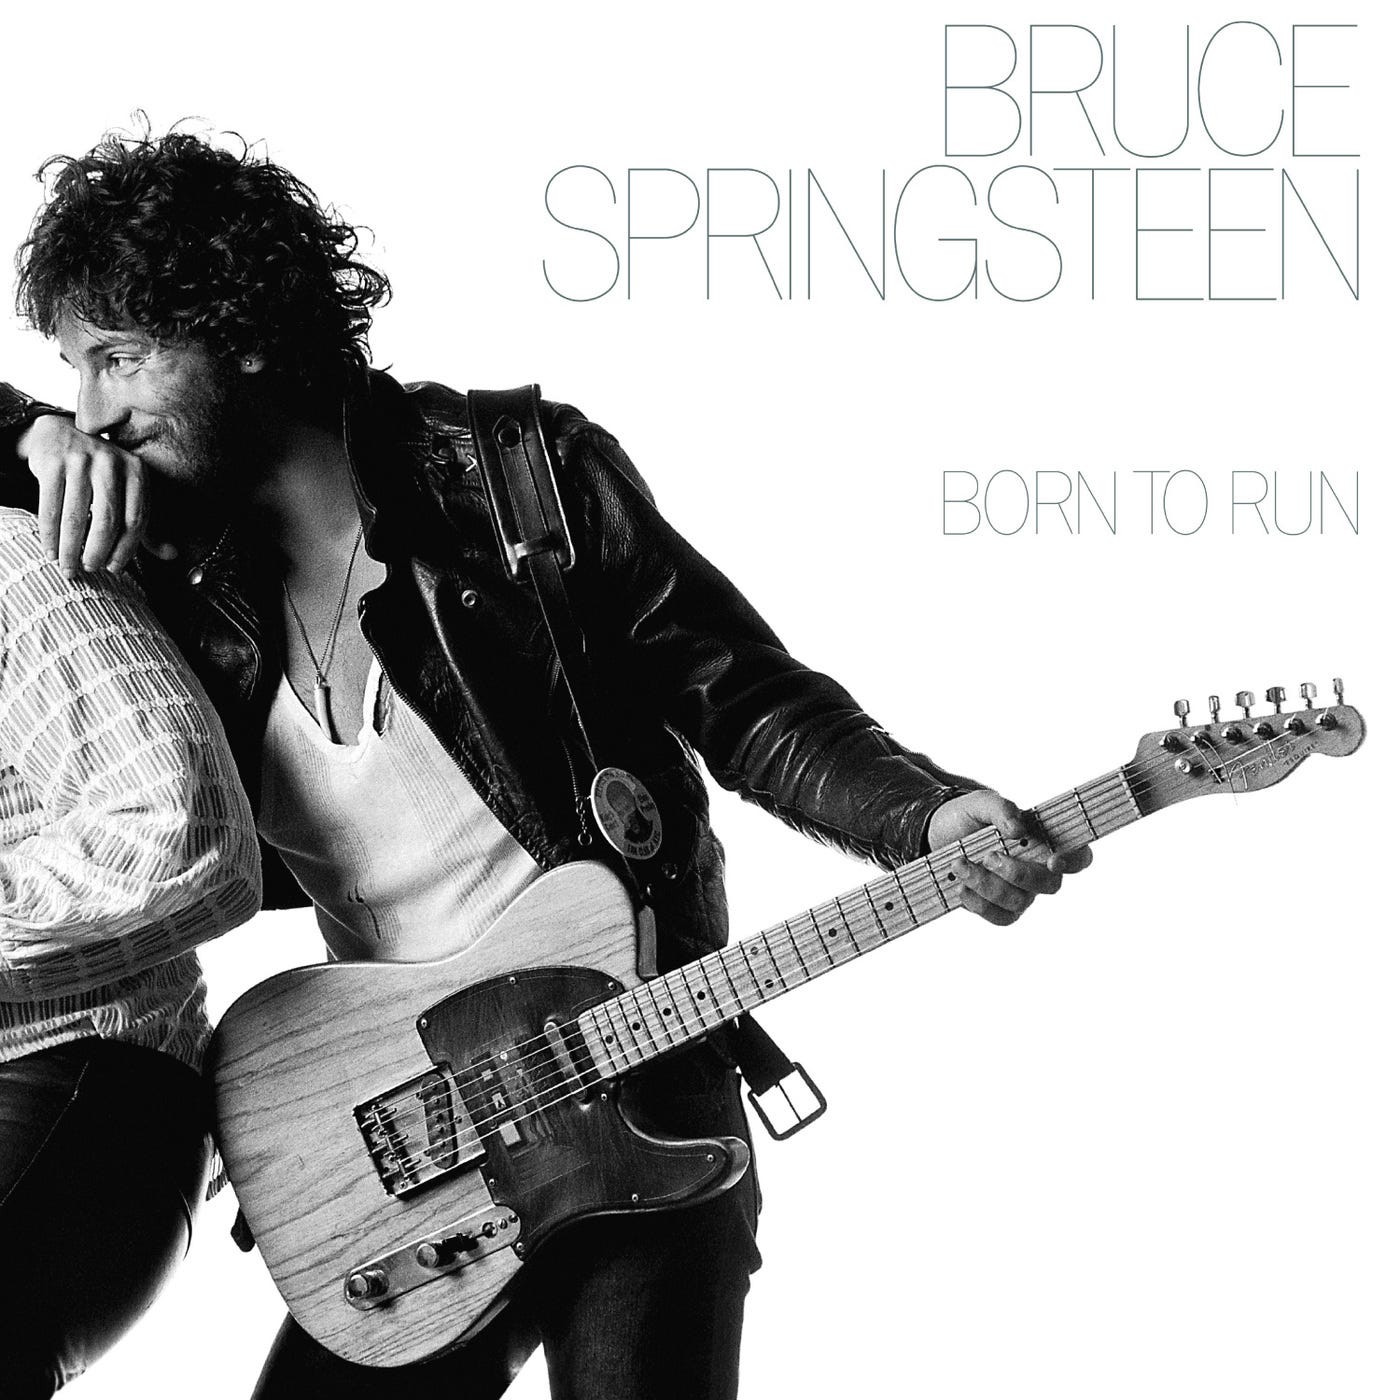 Born to Run by Bruce Springsteen (album and 40th anniversary poster) - Fonts In Use